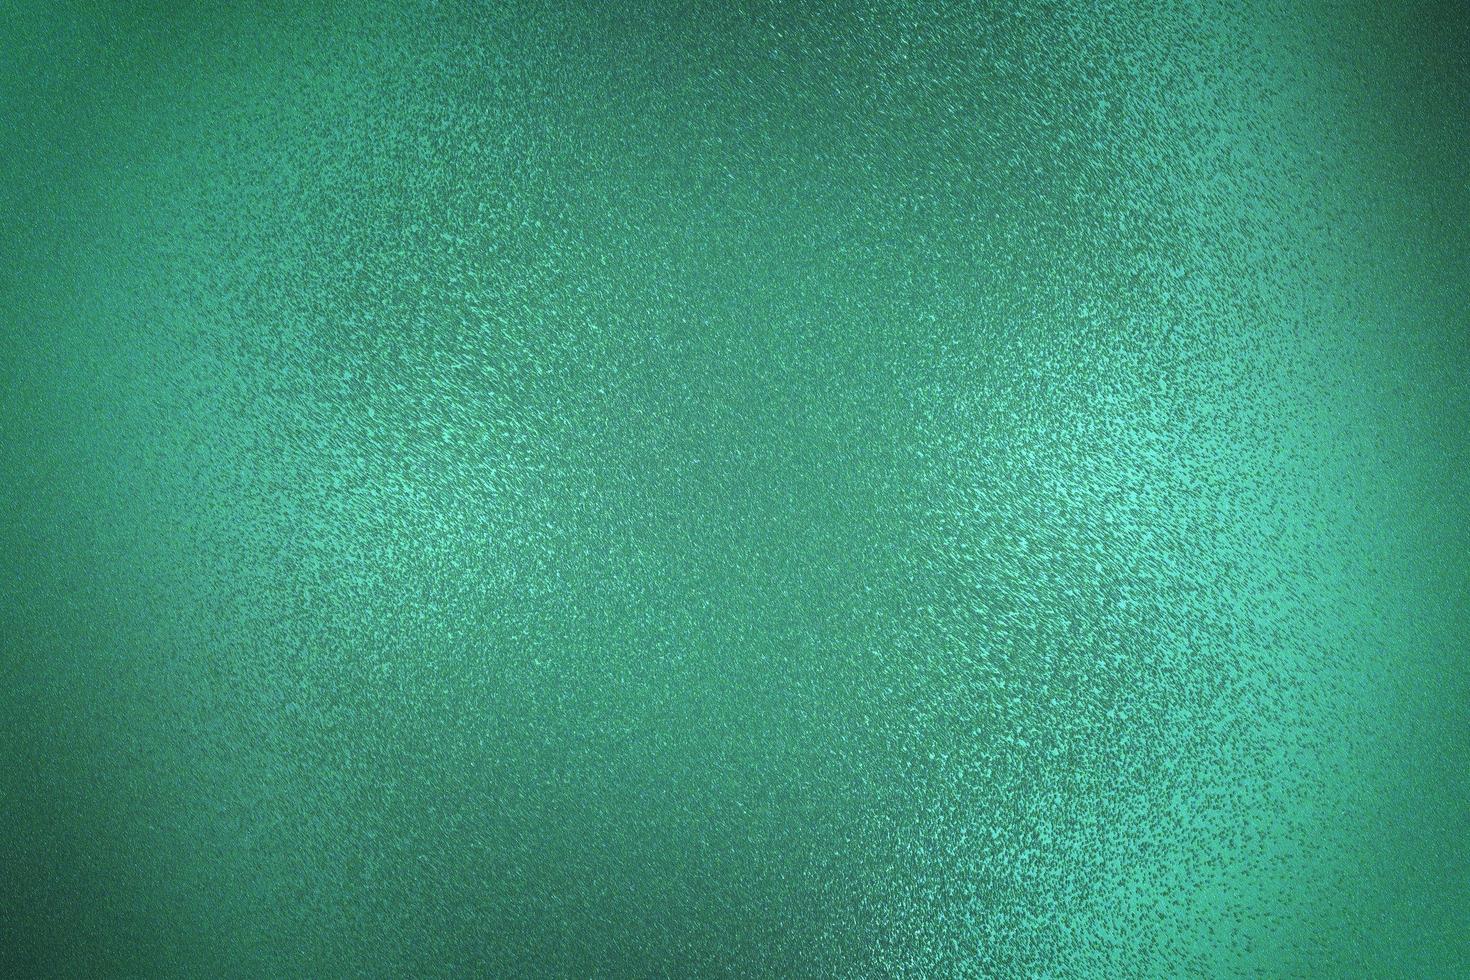 Texture of green brushed metallic plate, abstract background photo